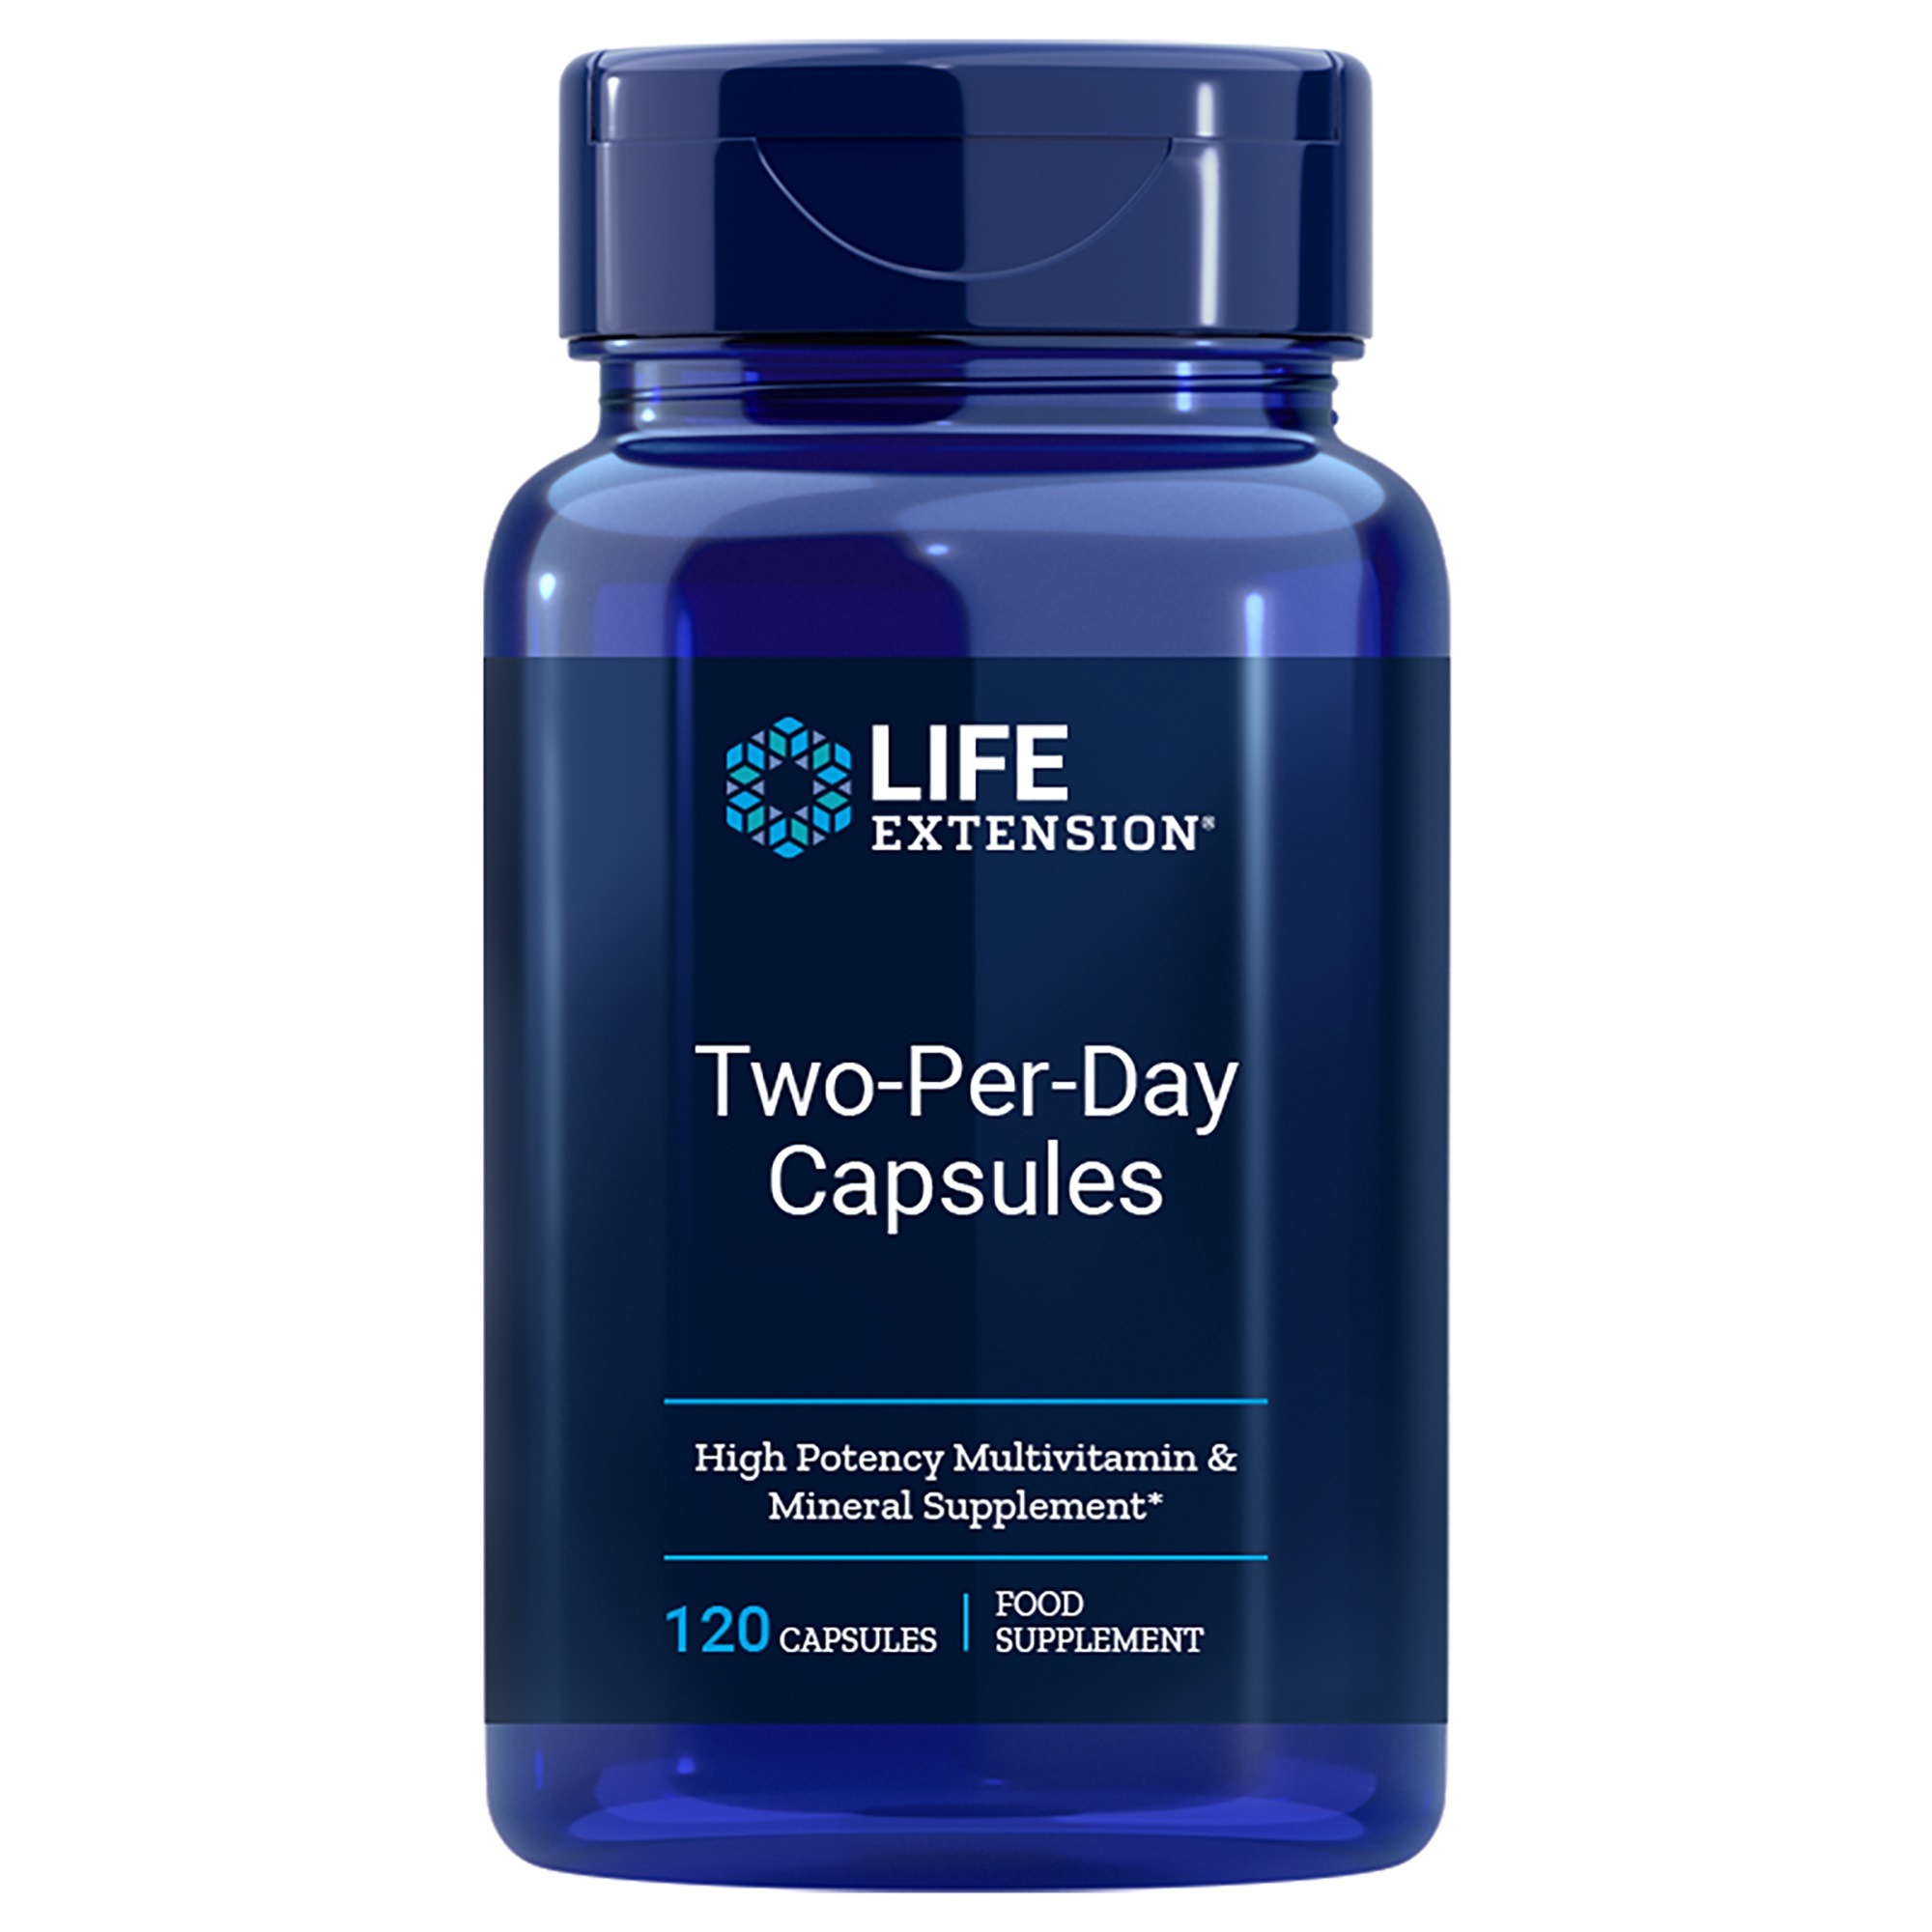 LifeExtension One-Per-Day Capsules